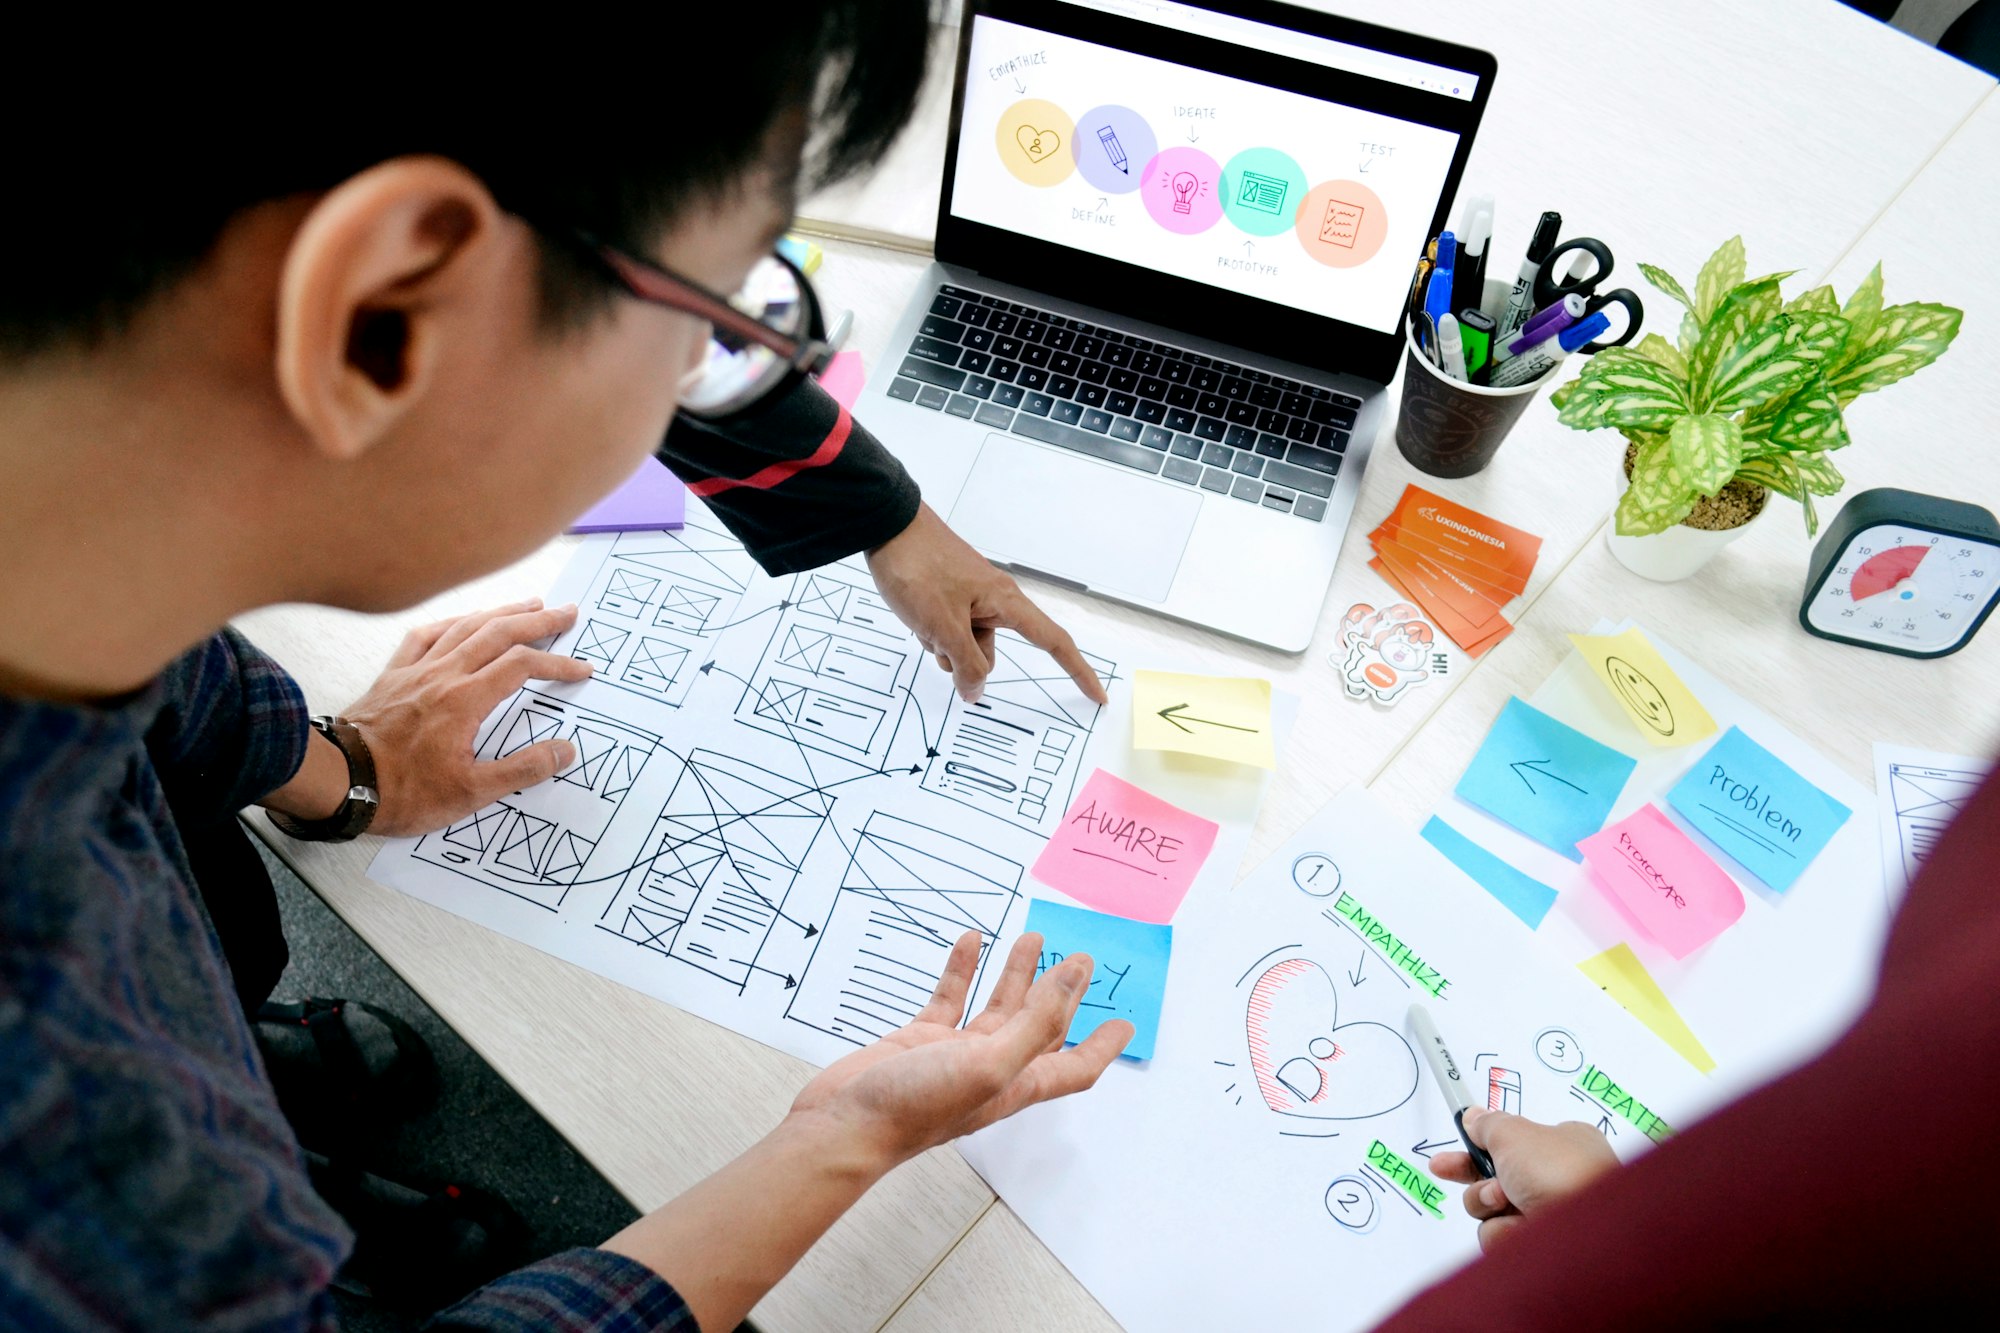 Master design thinking with these curated resources